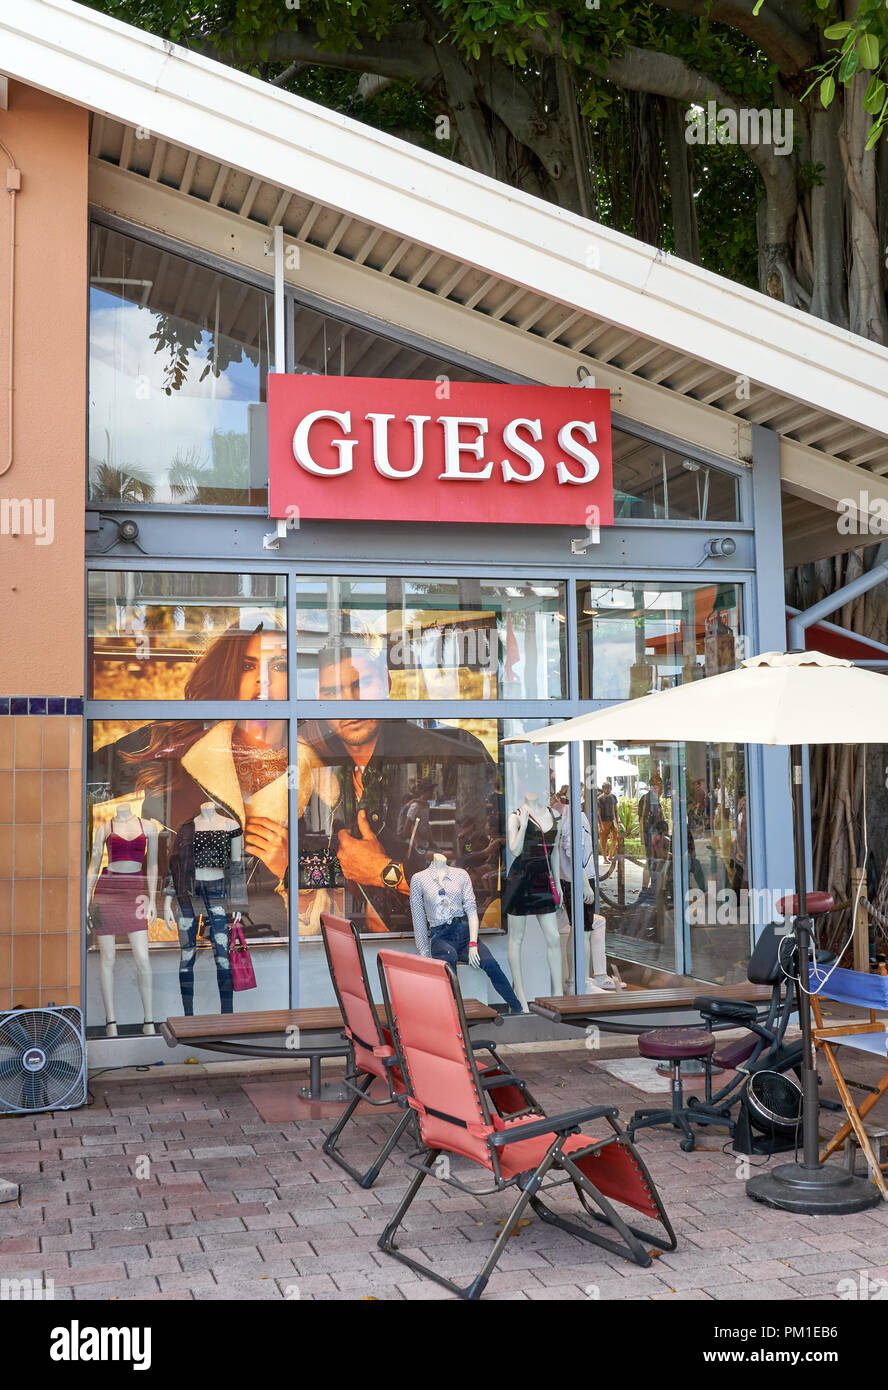 Guess Store High Resolution Stock Photography and Images - Alamy